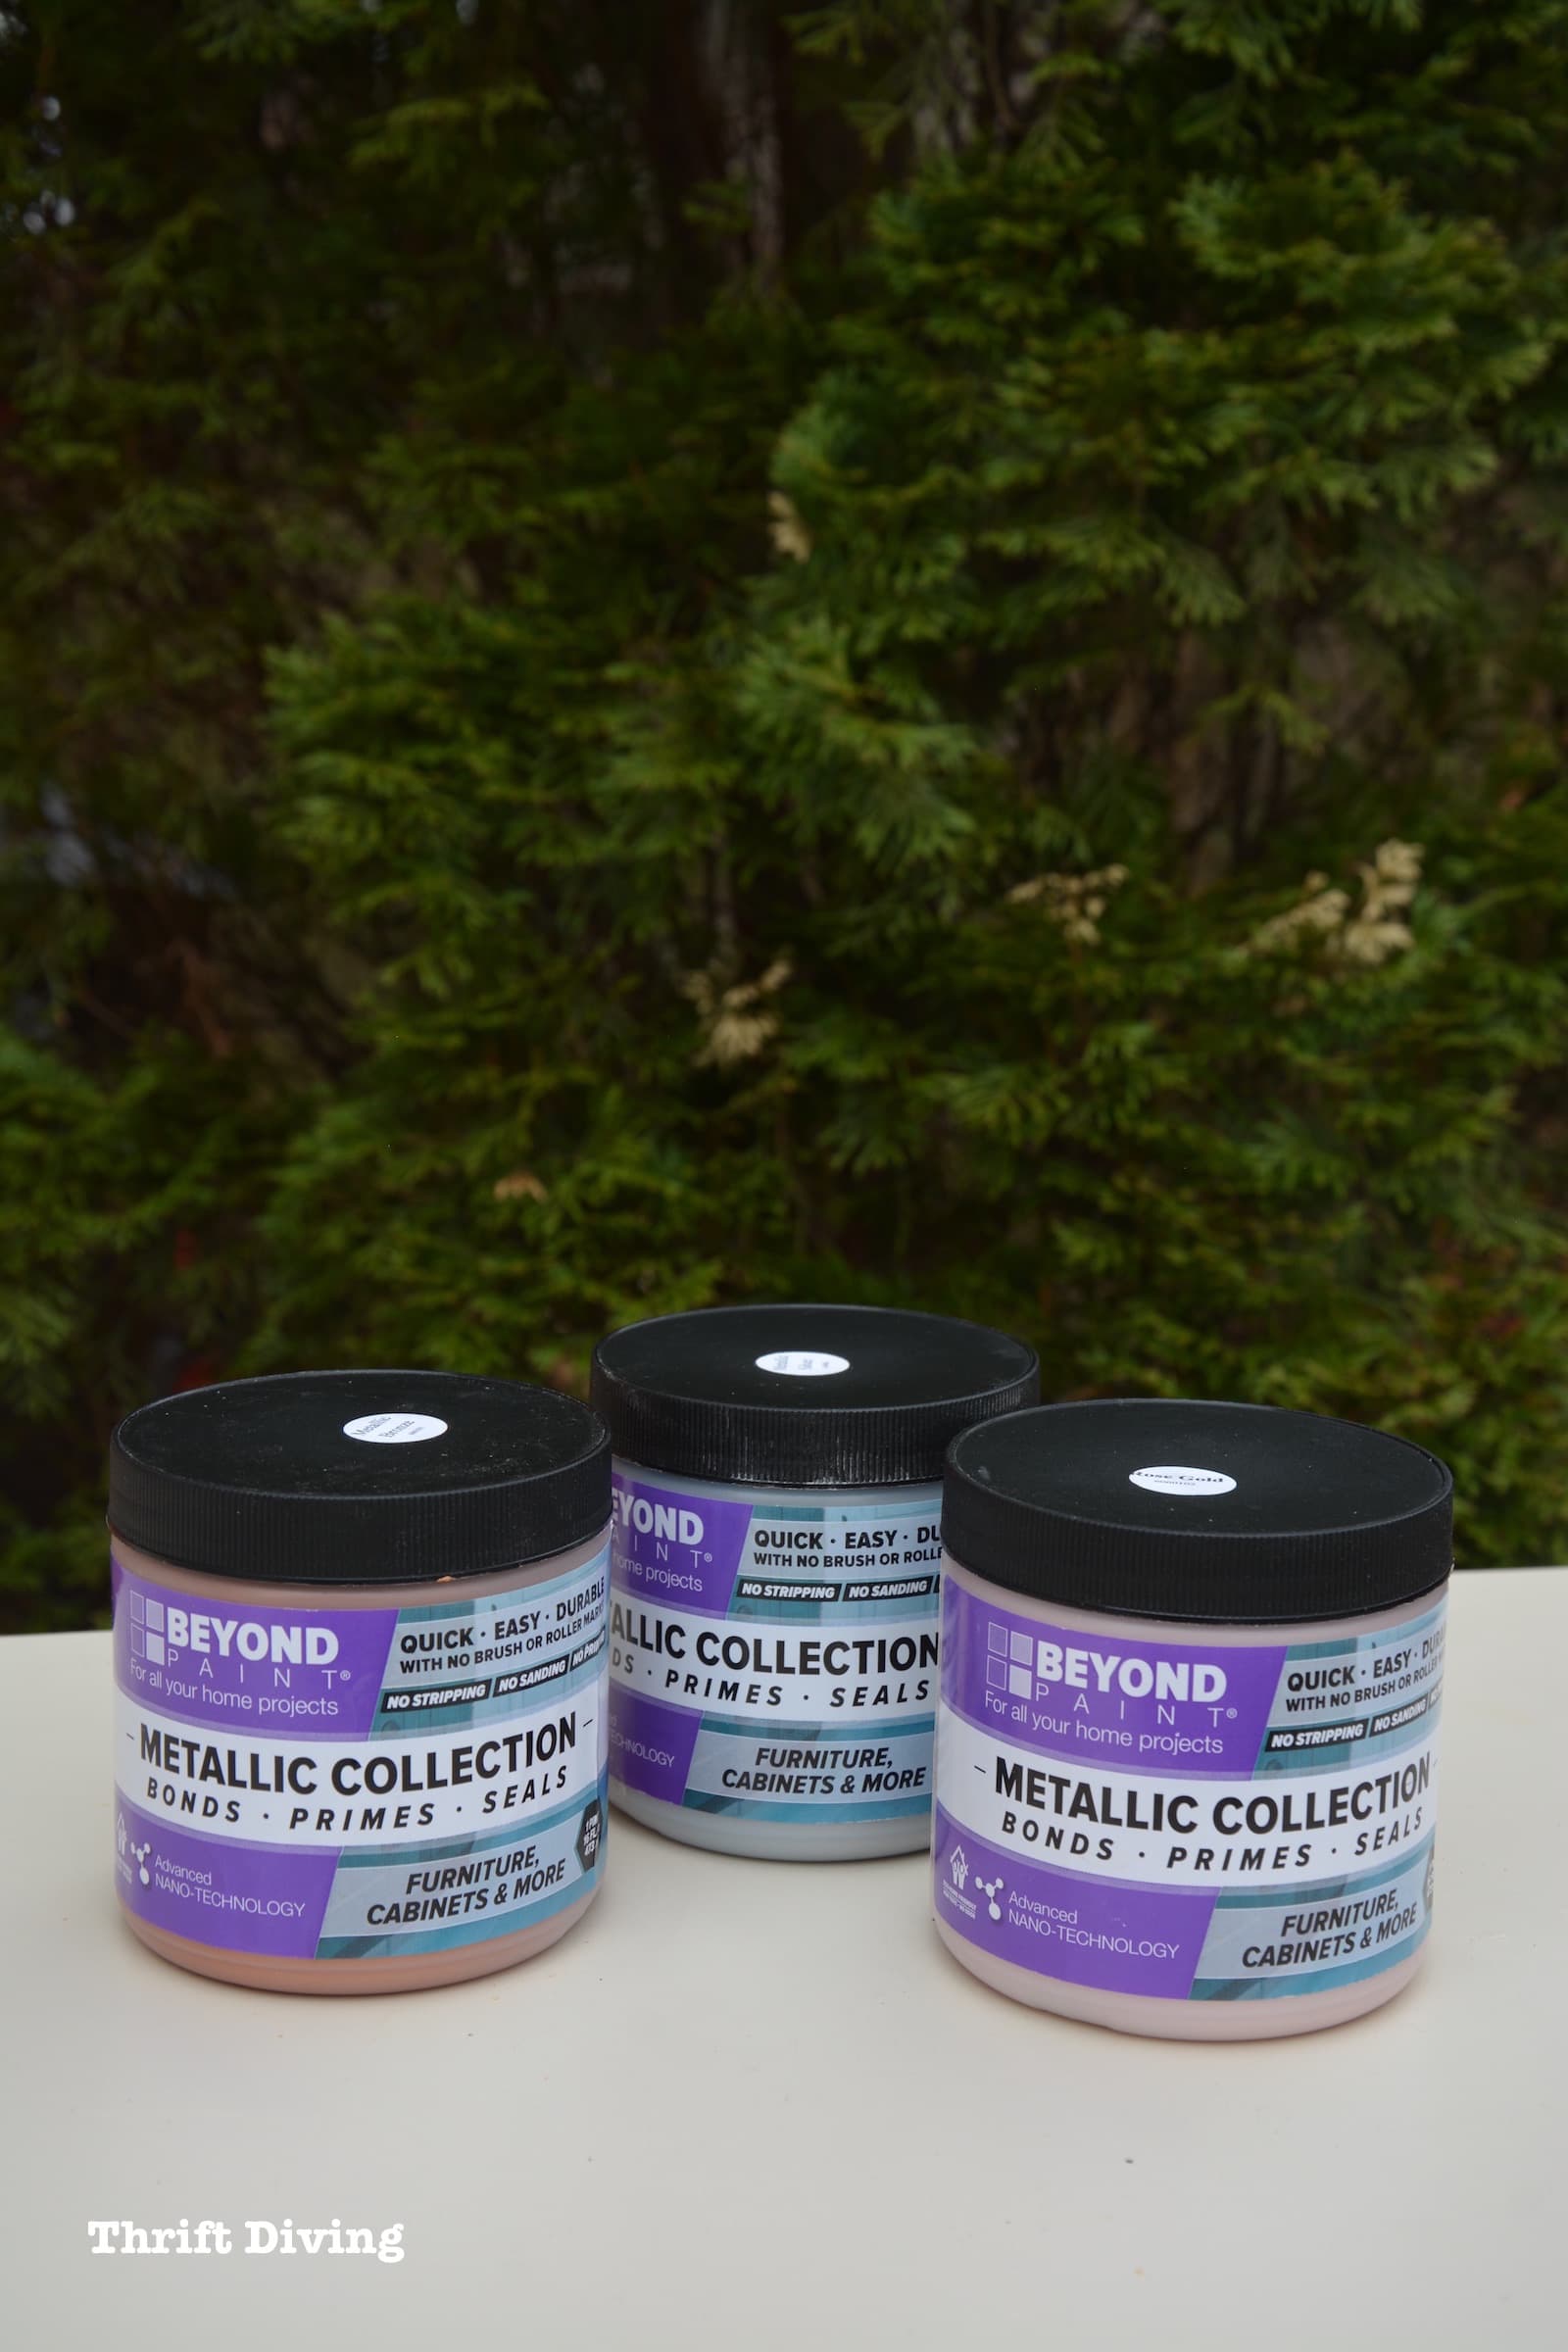 Beyond Paint Metallic Collection of Paints